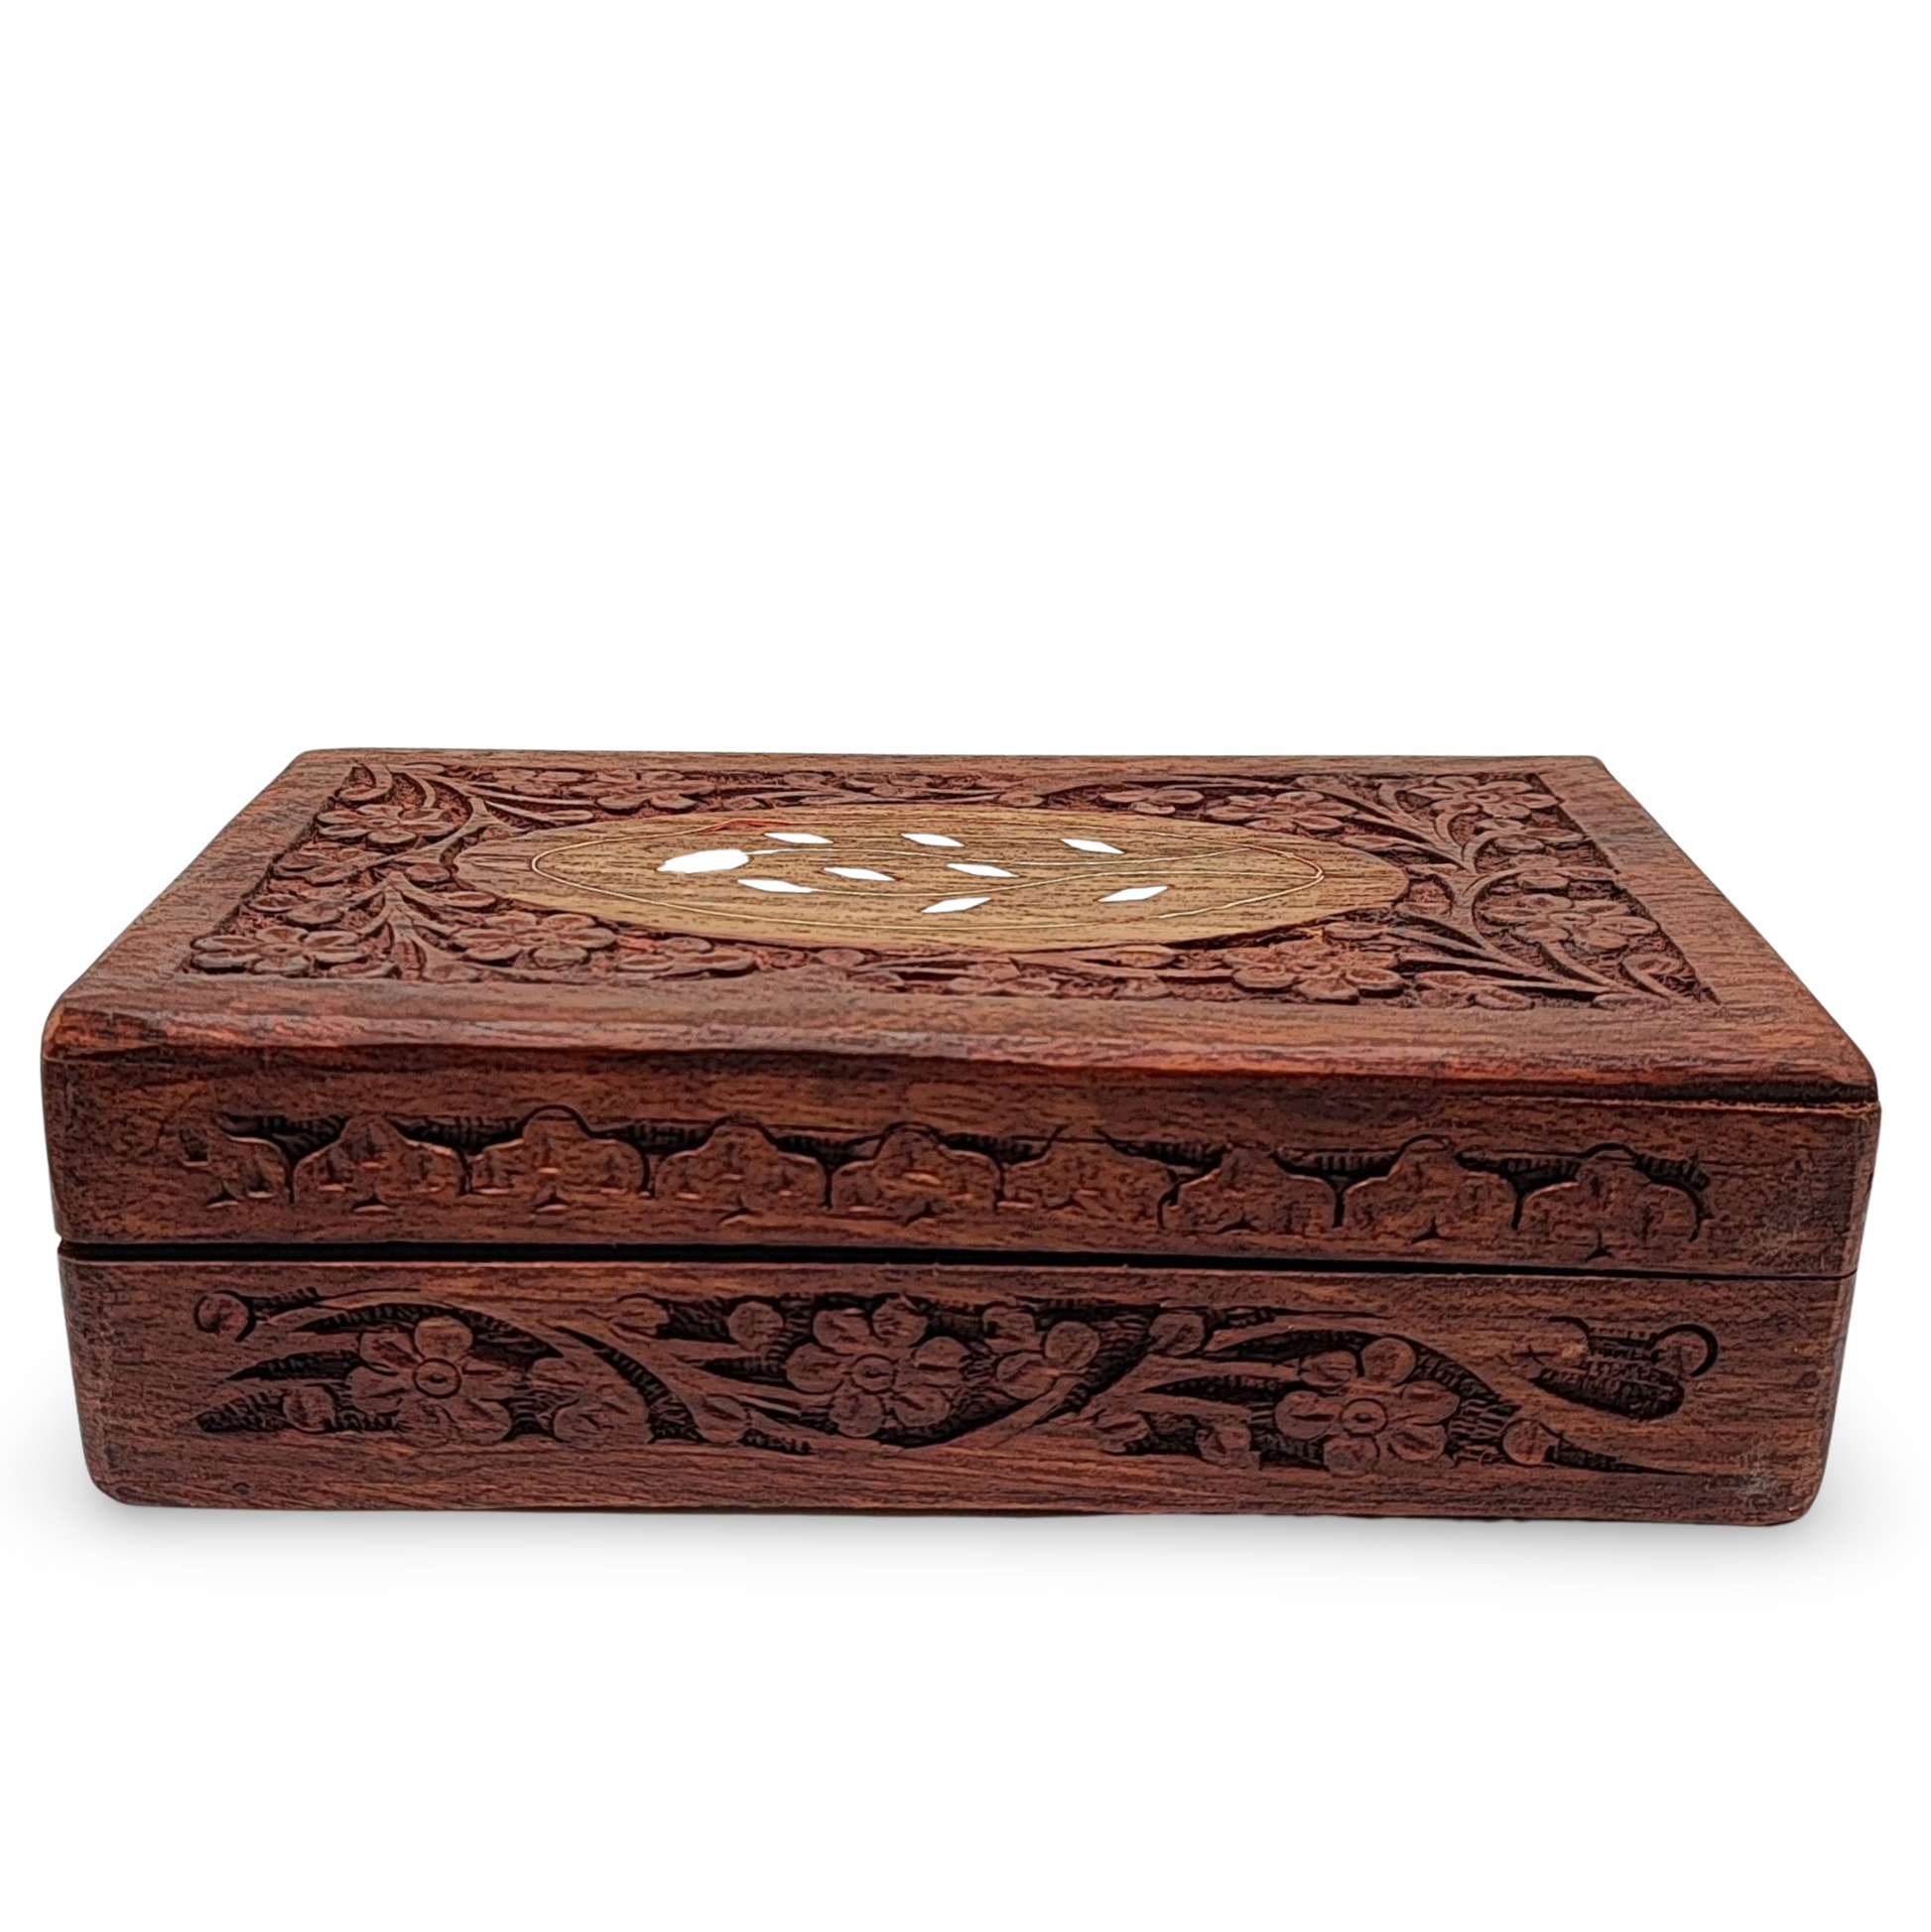 7 Chakras -Essential Oil & Bracelet -Deluxe Gift Set with Wood Box -Limited Edition - Arômes et Évasions